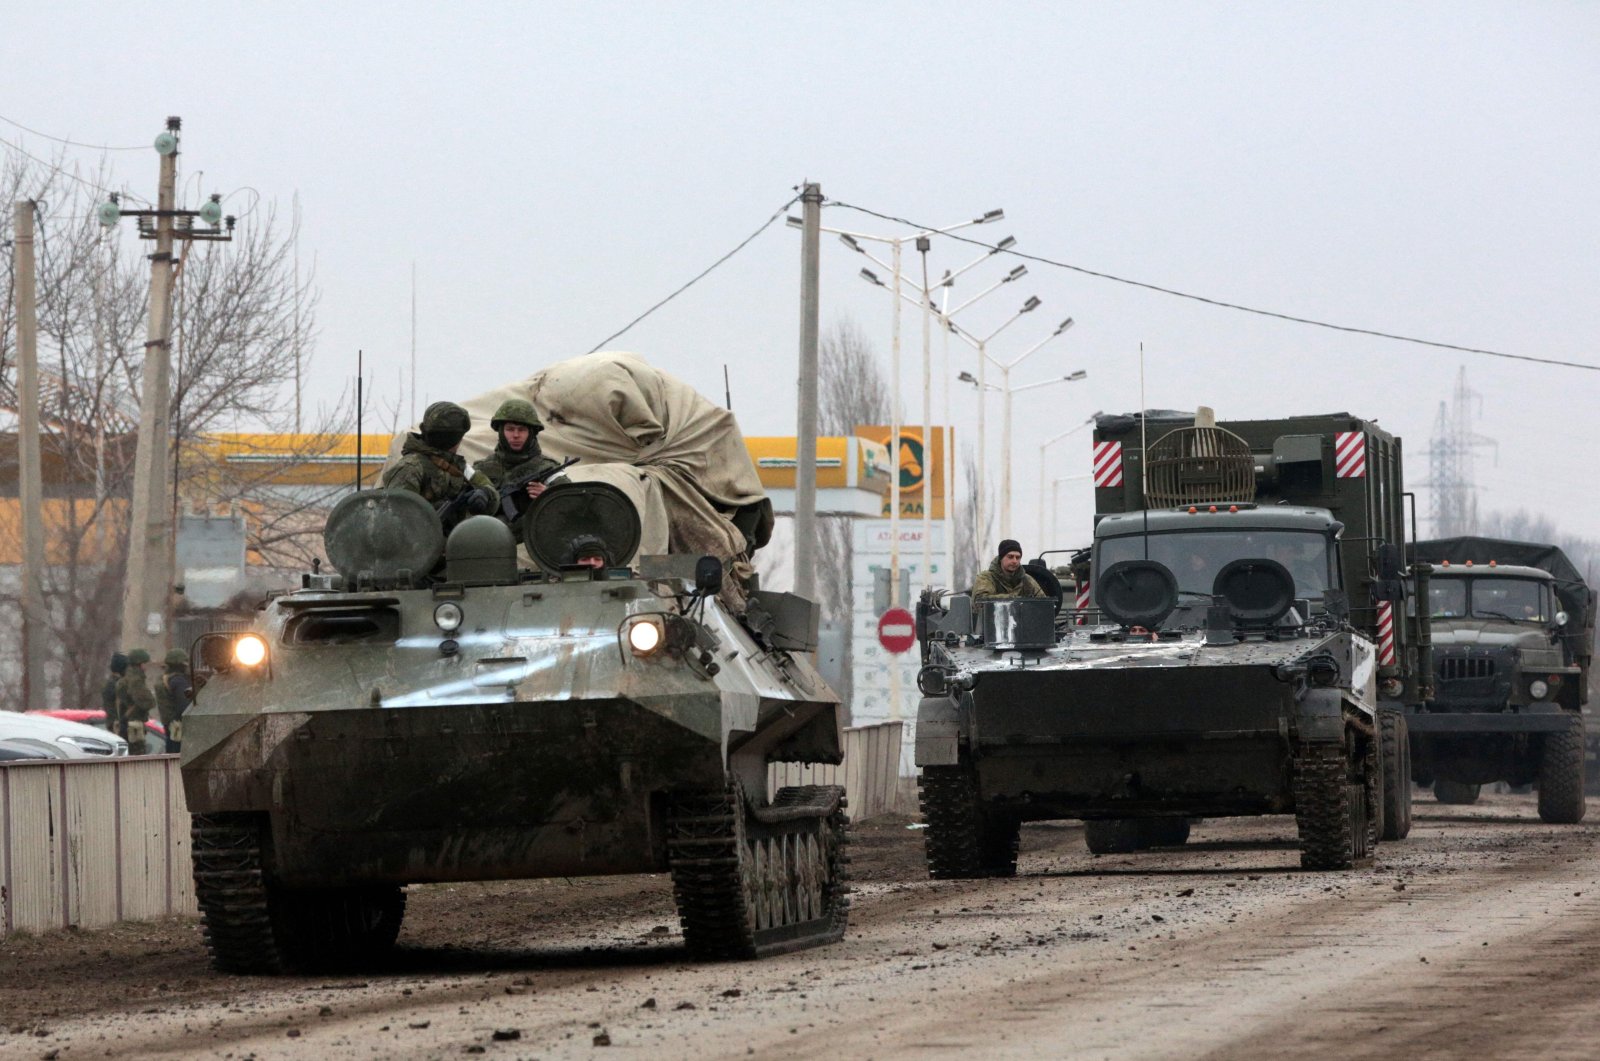 Russian army military vehicles are seen in Armyansk, Crimea, Ukraine, Feb. 25, 2022. (AFP File Photo)